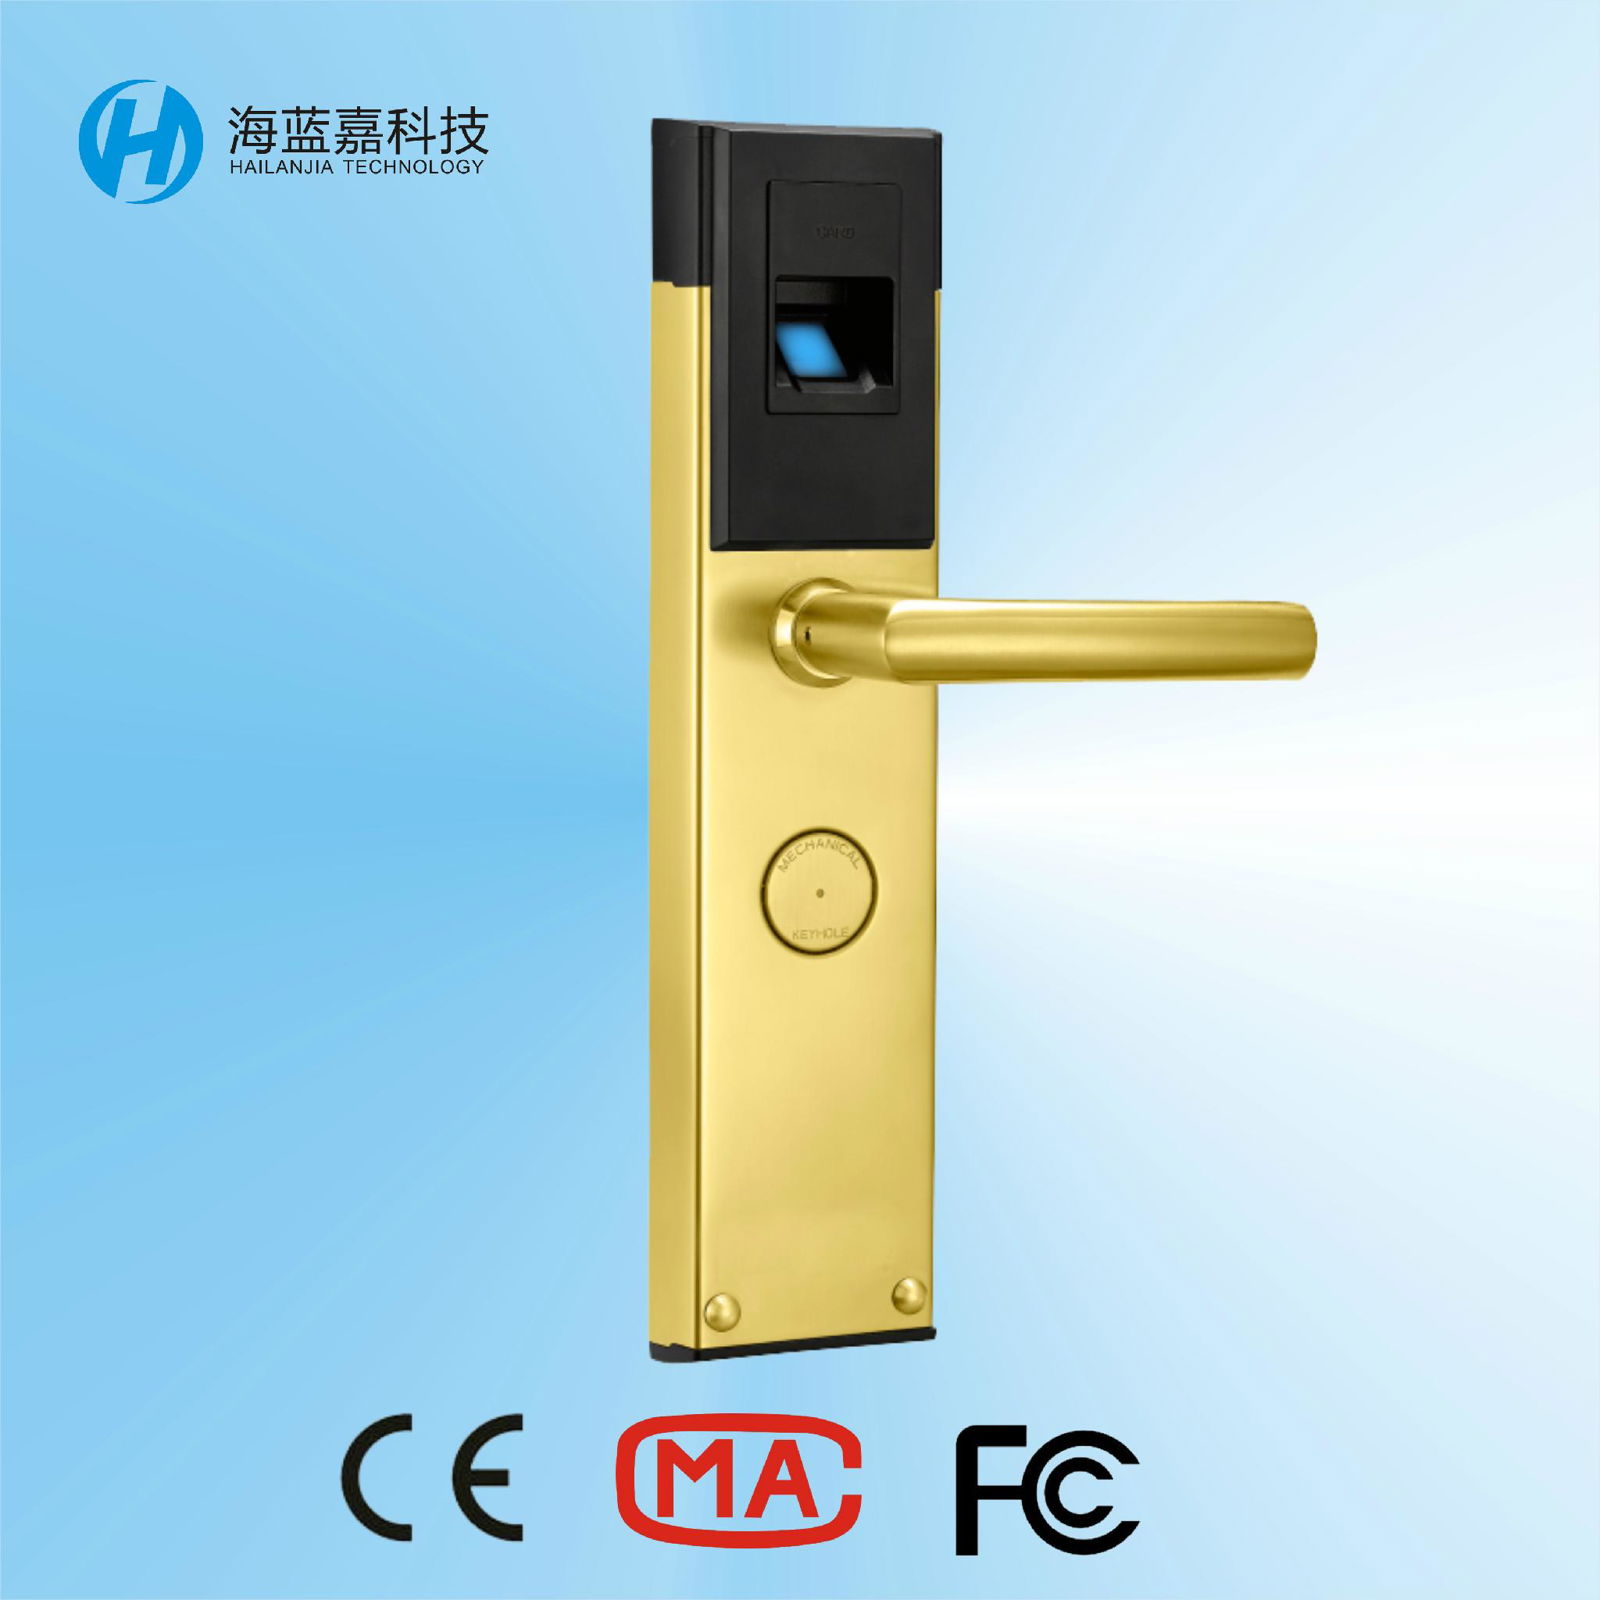 Hailanjia security safety biometric home door lock H003ZM15-Y 2